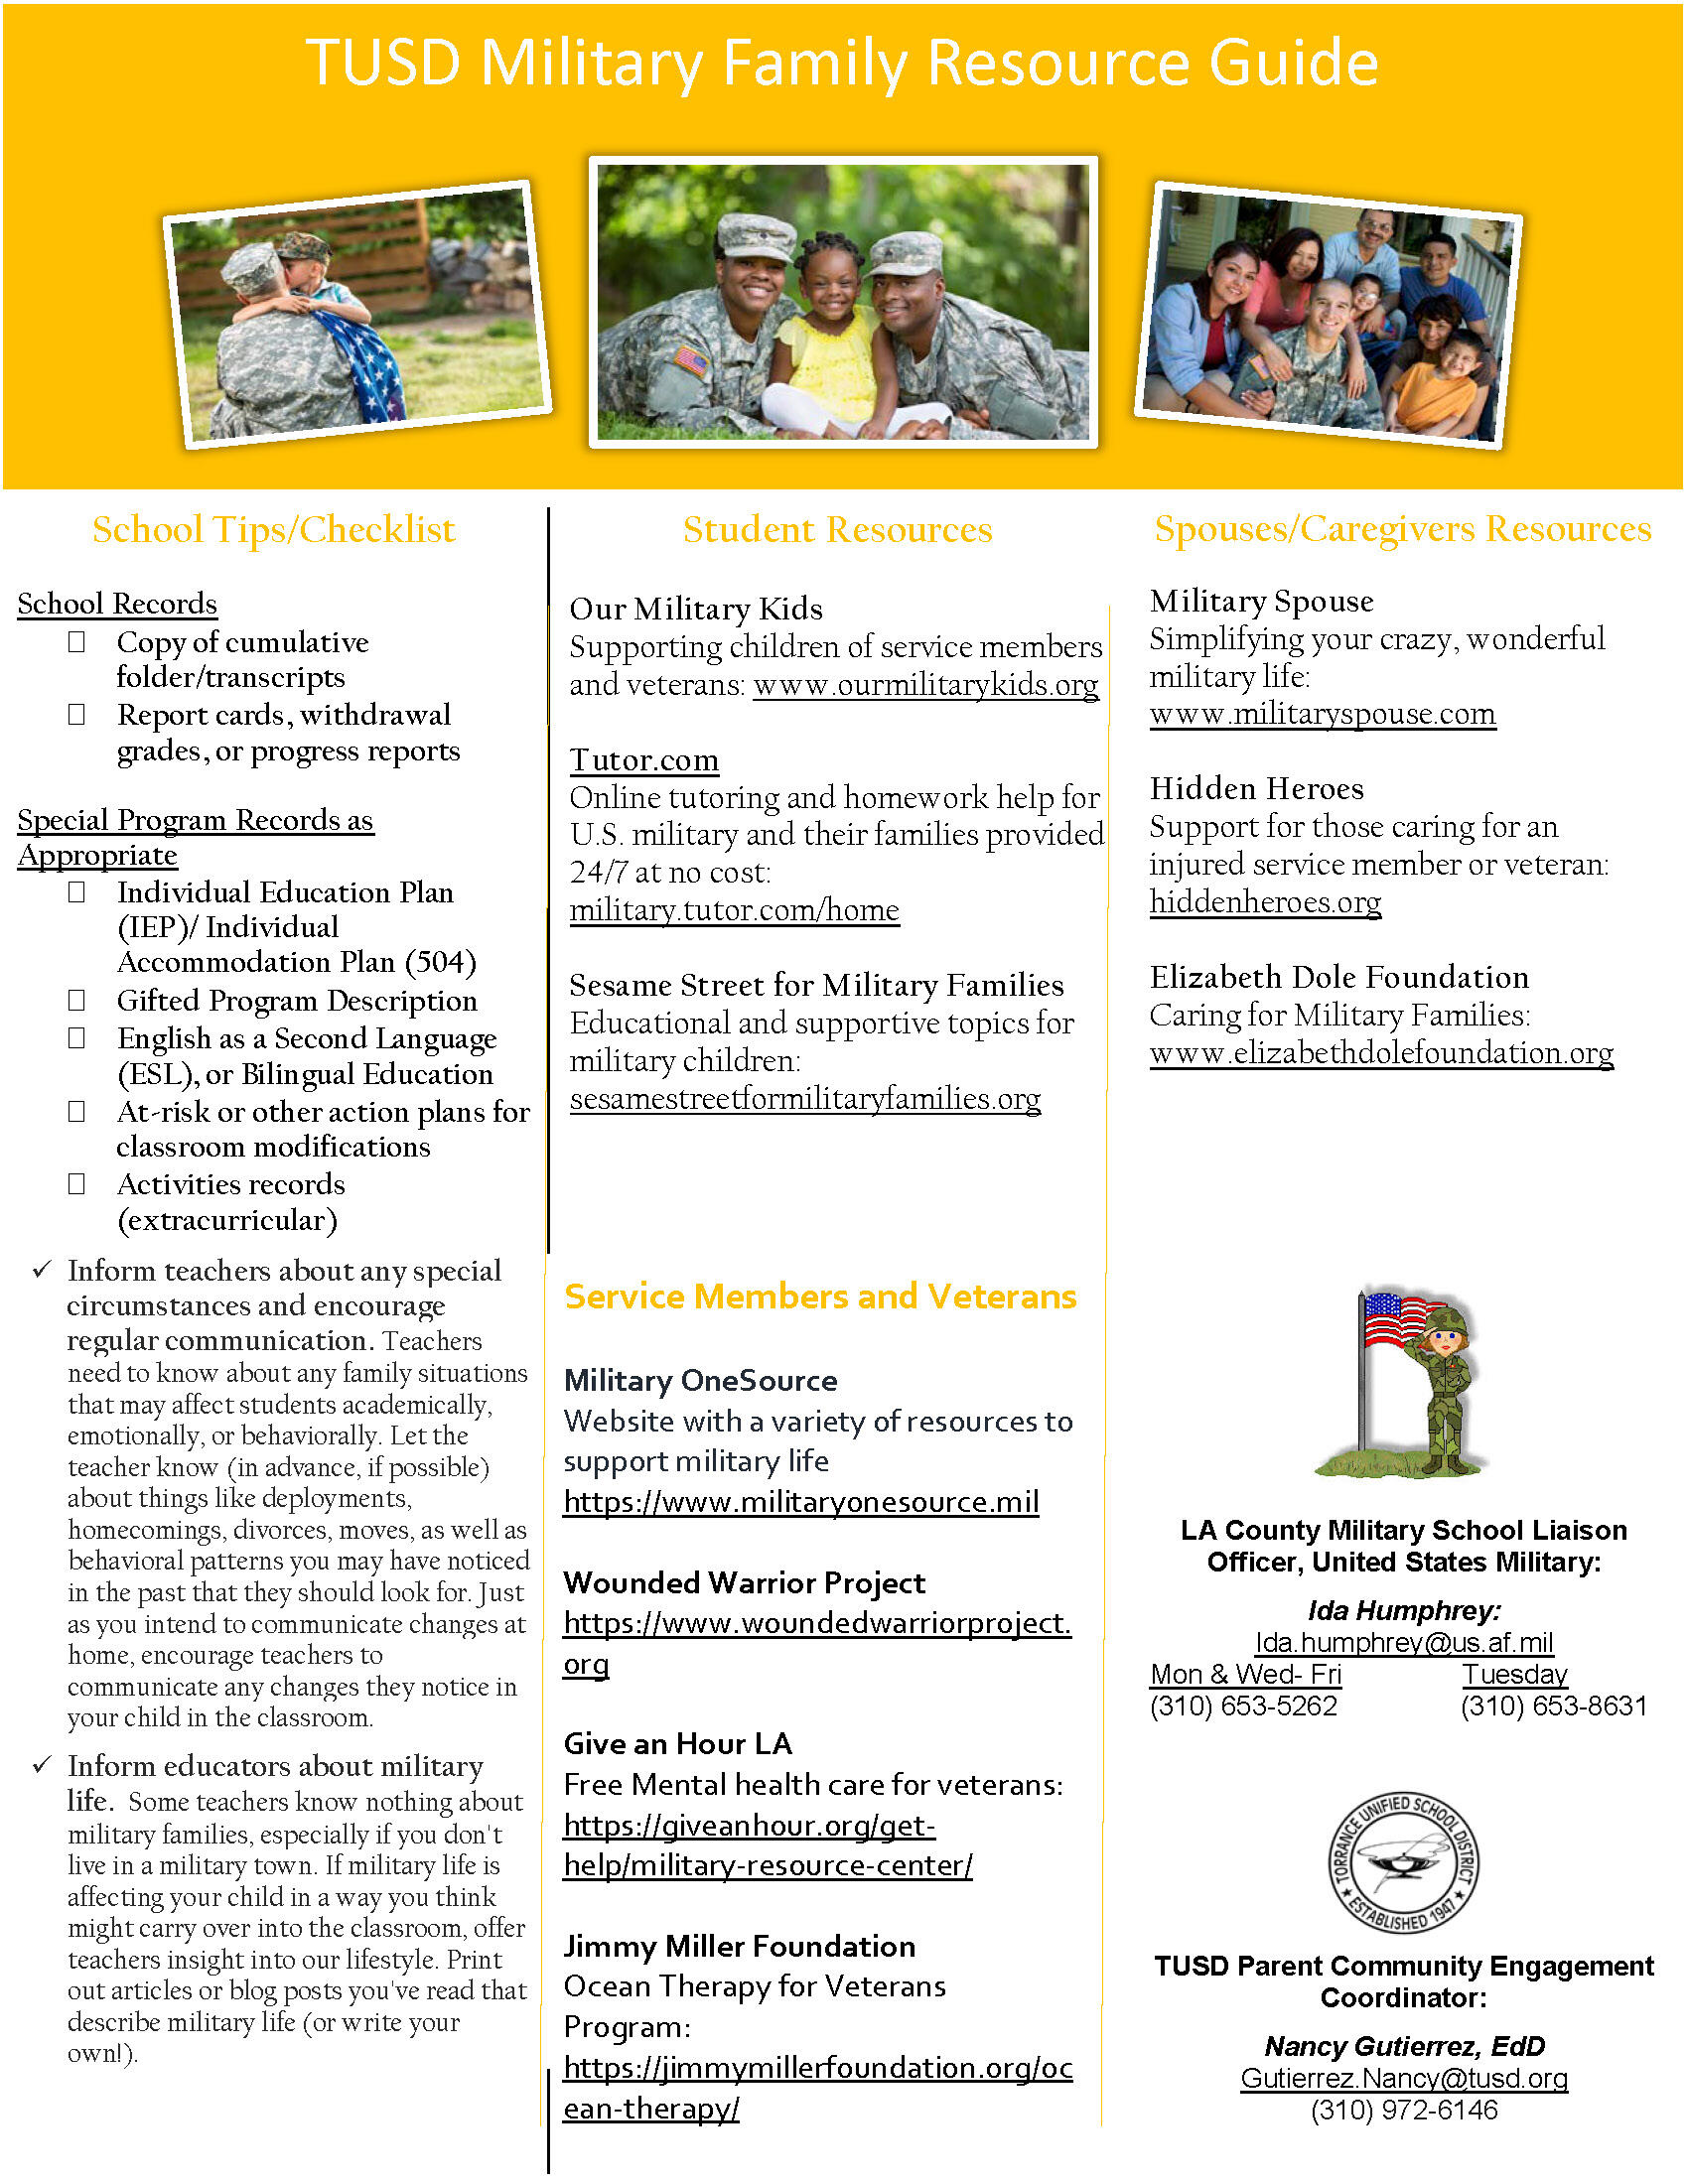 TUSD Military Family Resource Guide